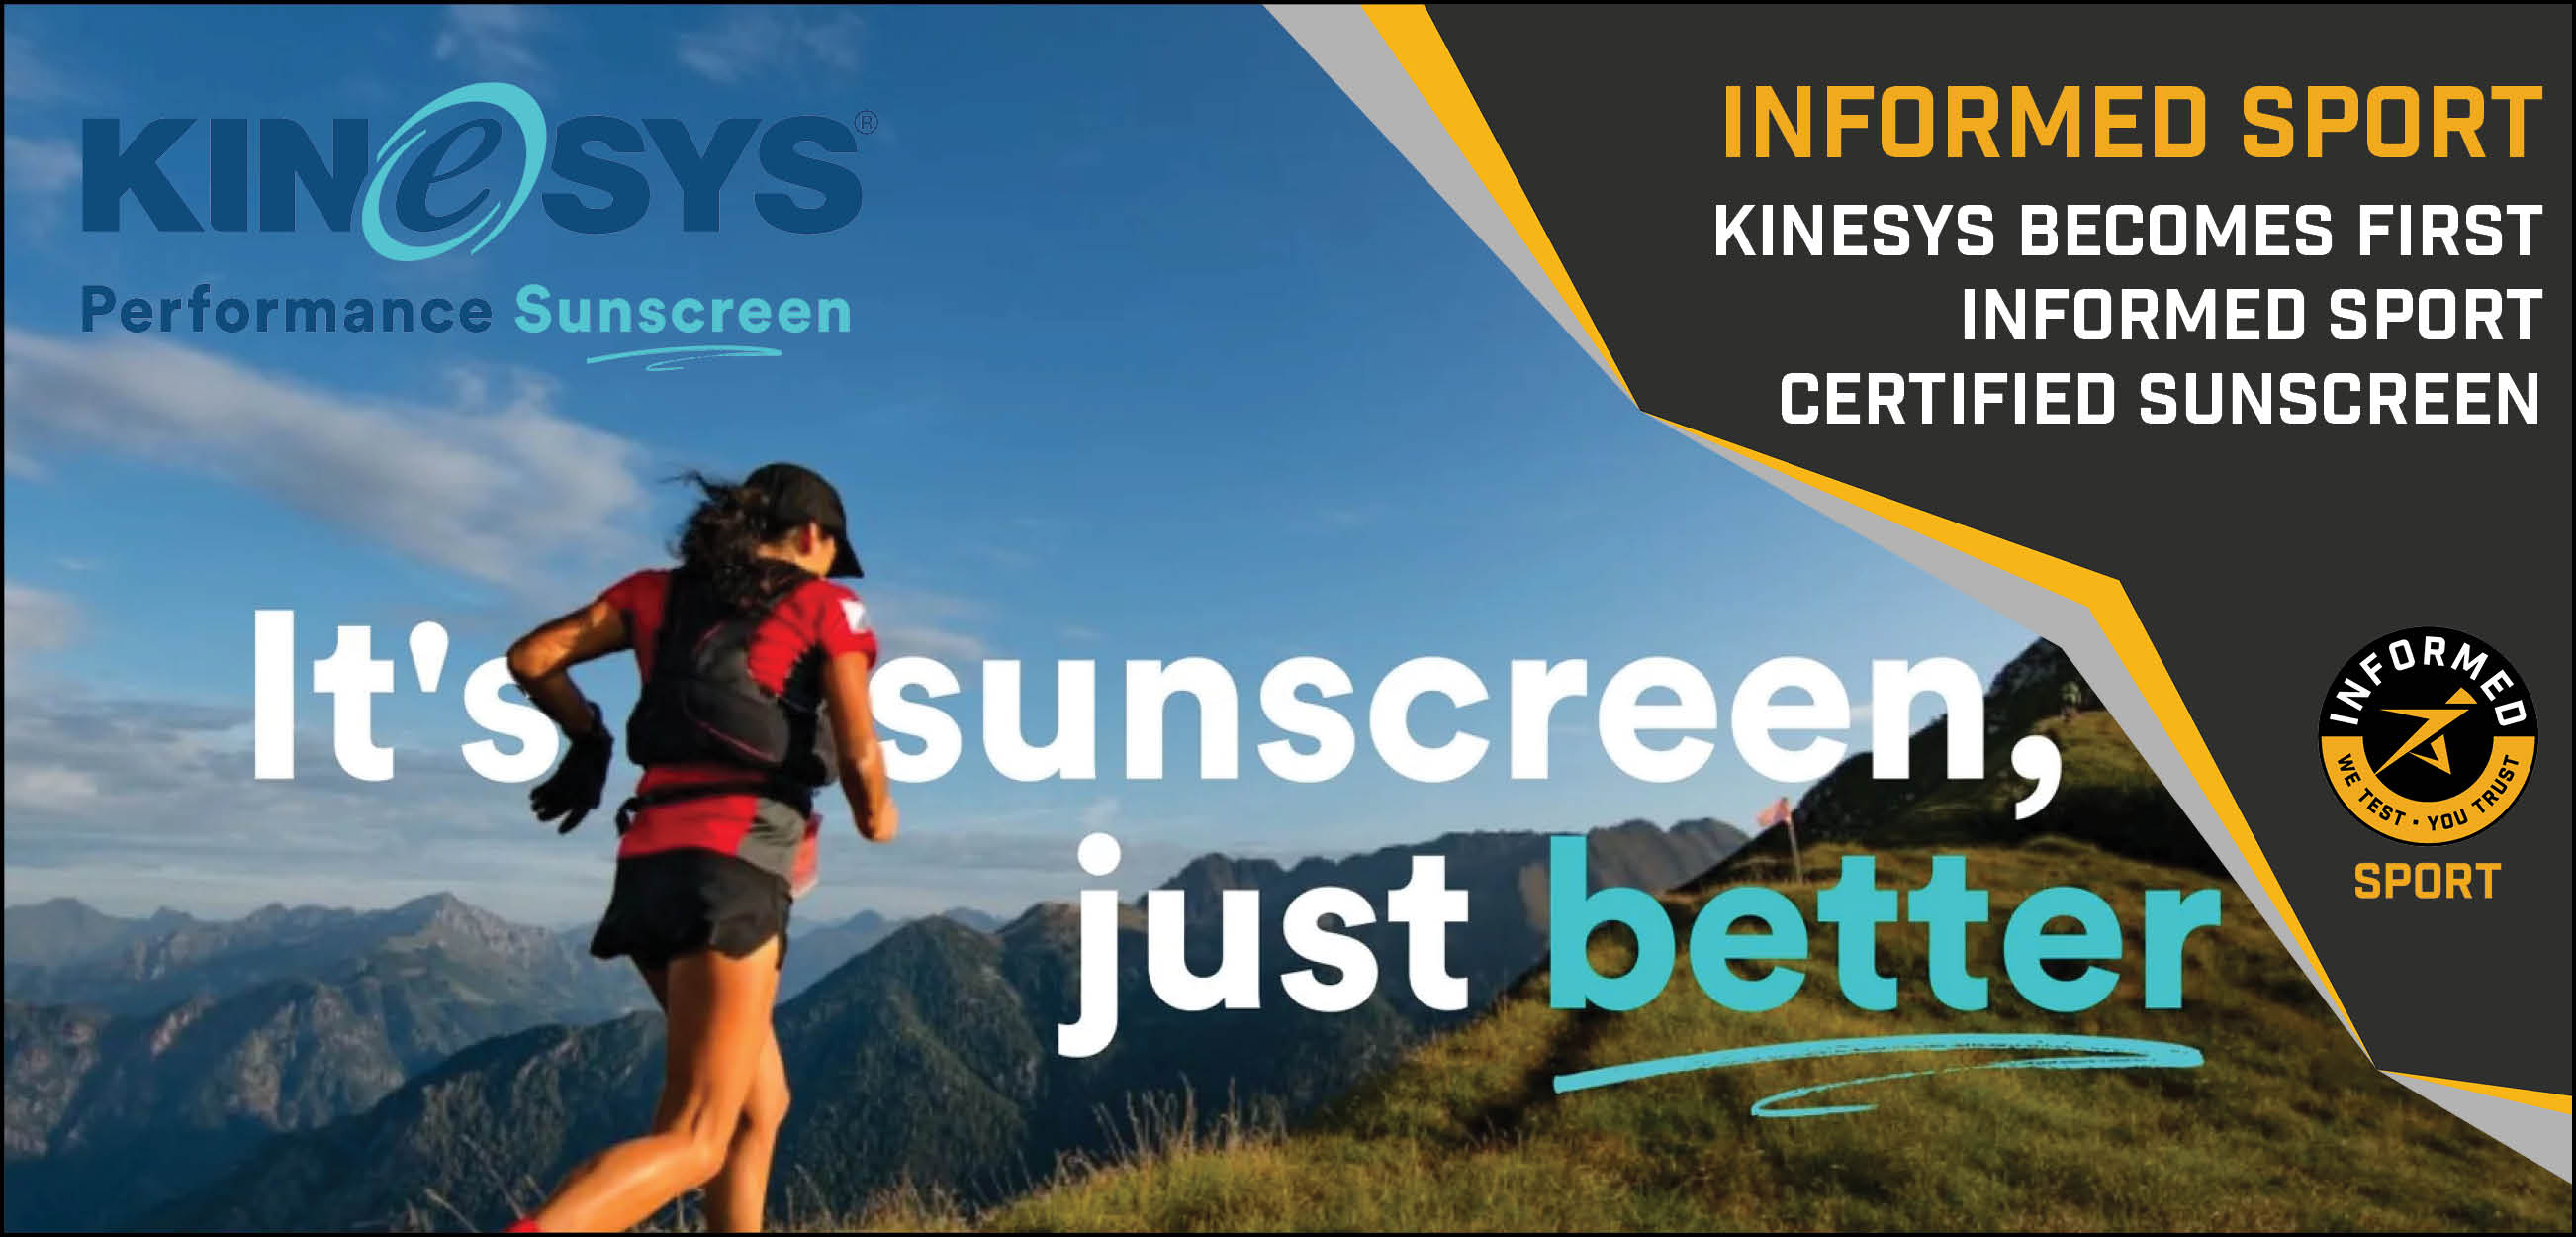 KINeSYS Becomes the First Informed Sport Certified SunscreenKINeSYS Becomes the First Informed Sport Certified Sunscreen